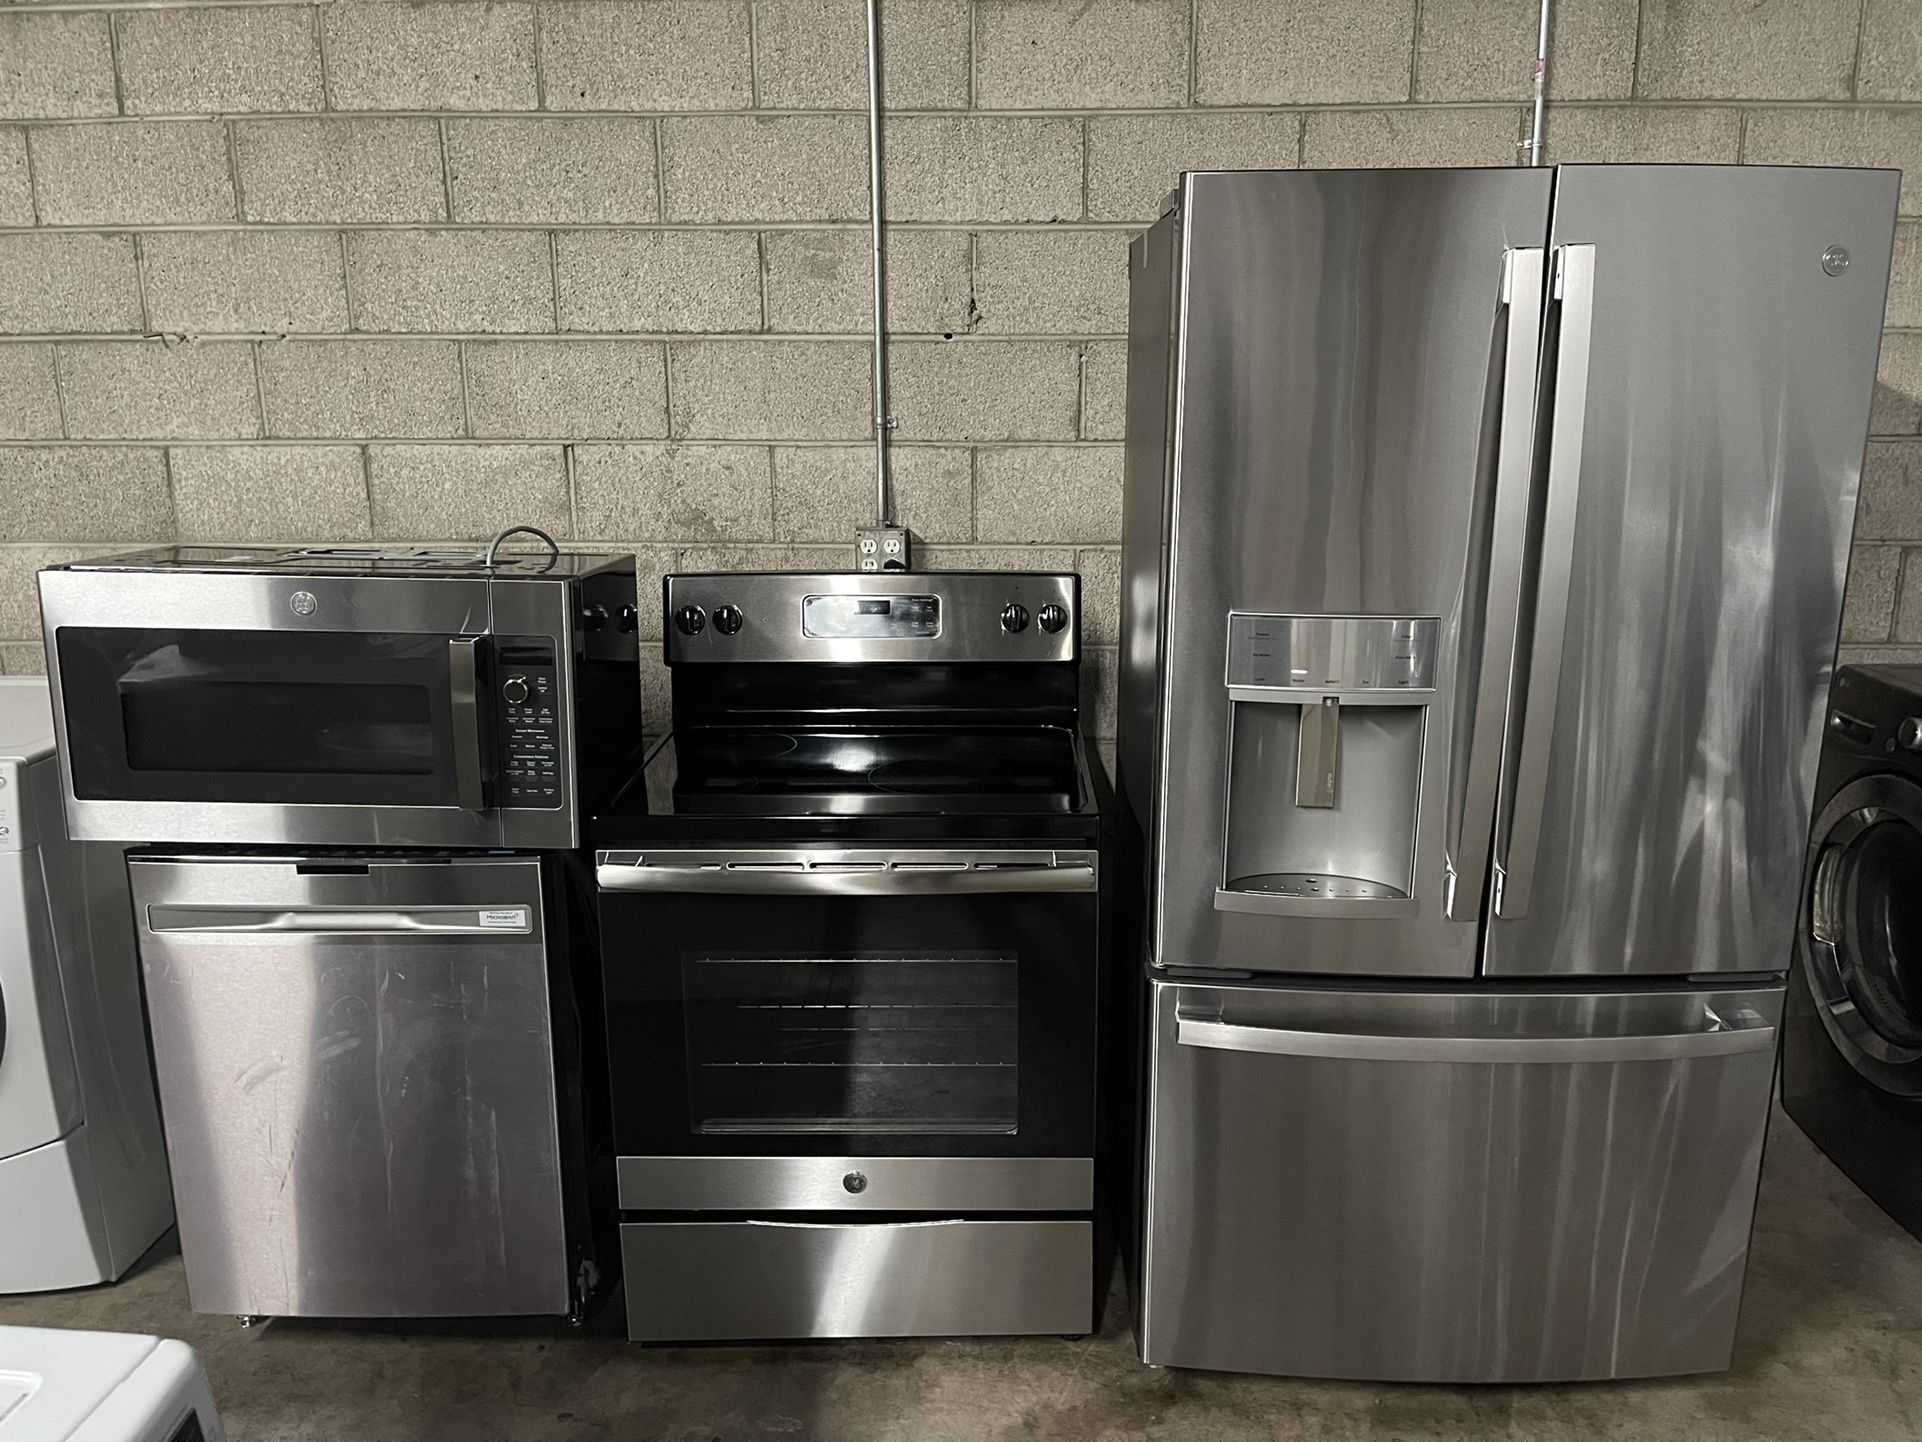 2021 BEAUTIFUL GE STAINLESS STEEL KITCHEN APPLIANCES SET EXCELLENT WORKING  CONDITIONS VERY CLEAN for Sale in Phoenix, AZ - OfferUp